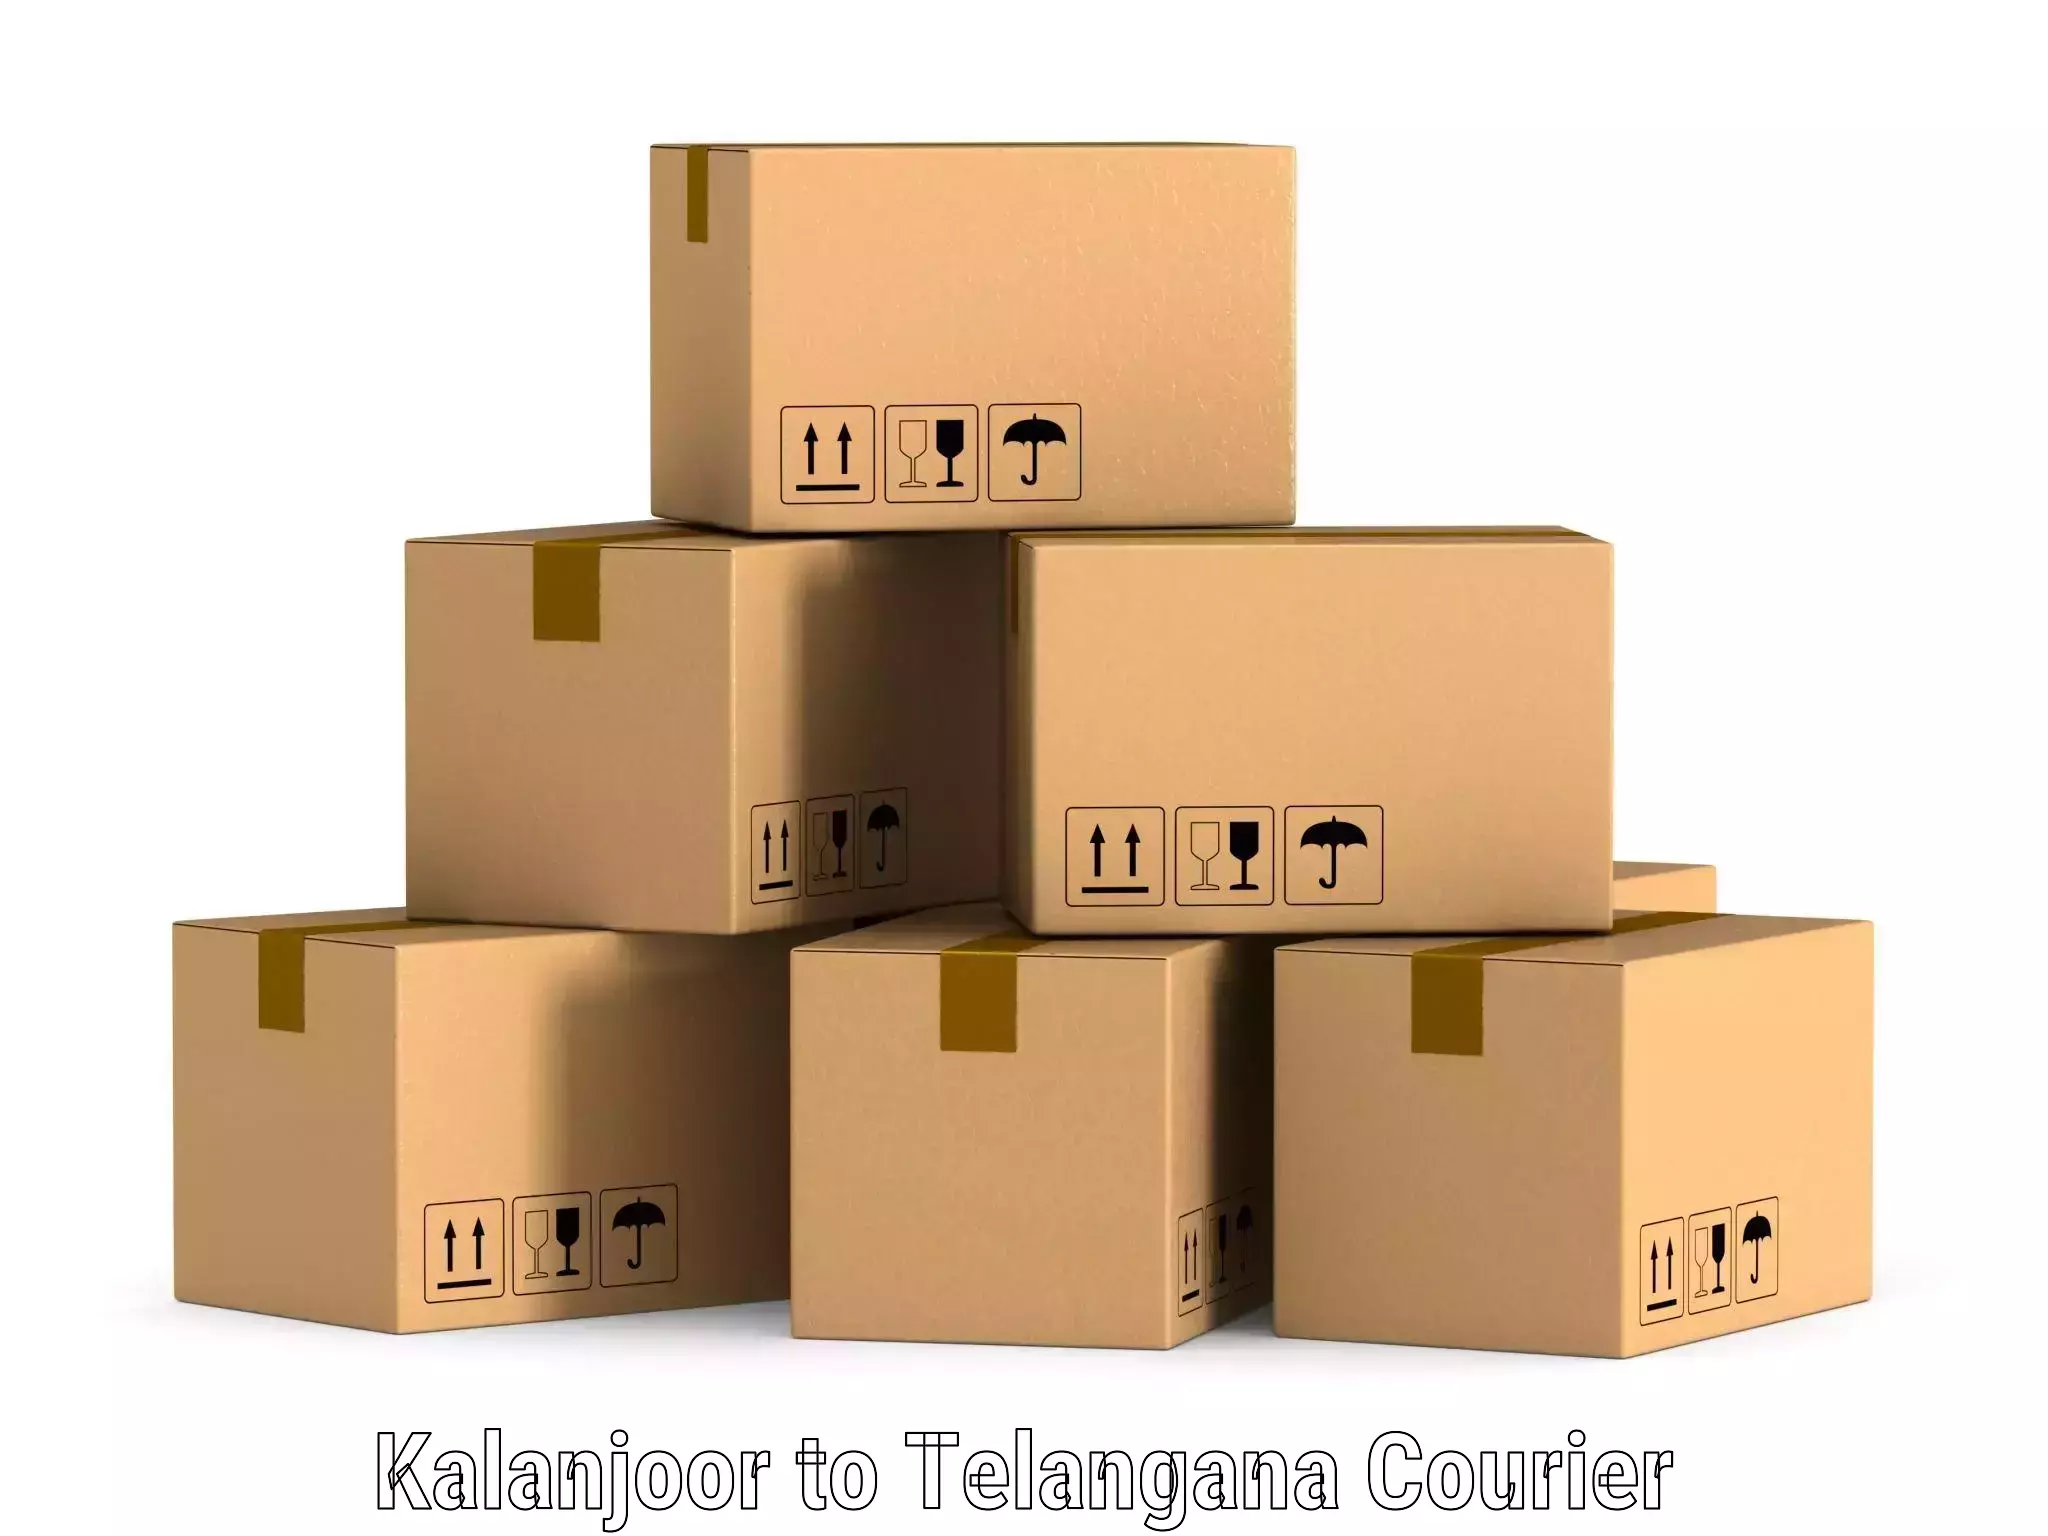 On-time delivery services in Kalanjoor to Secunderabad